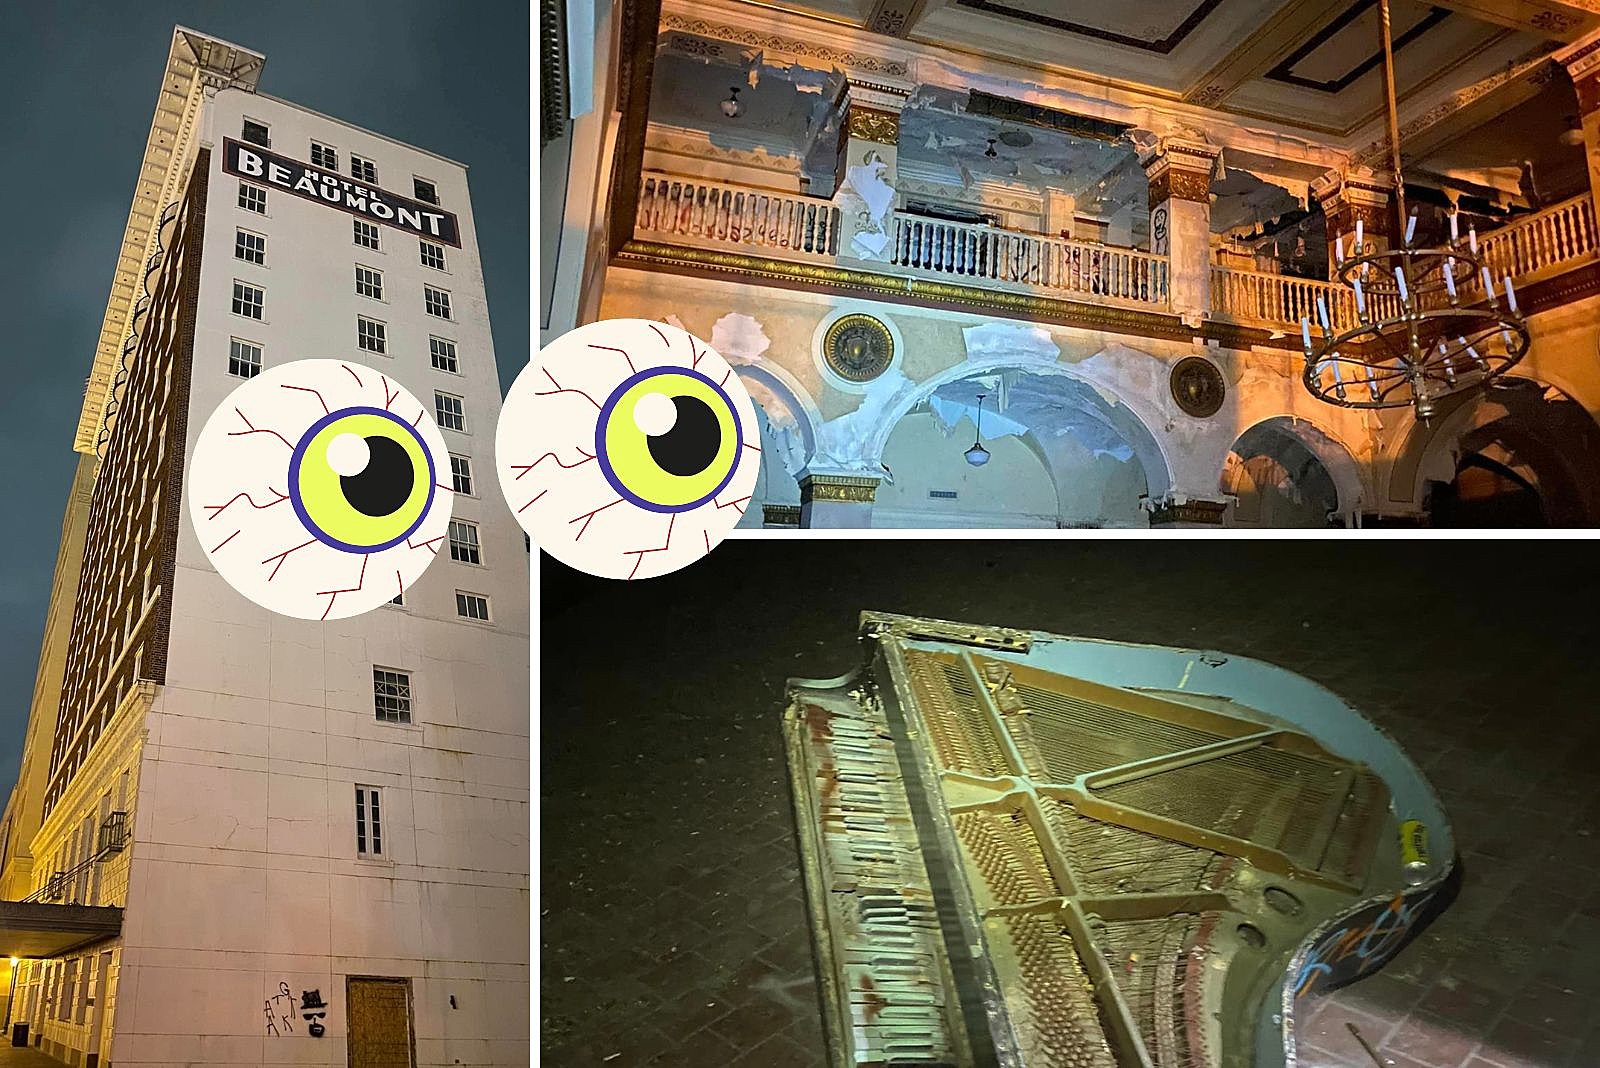 See Inside This Scary Abandoned Hotel In Beaumont, Texas image